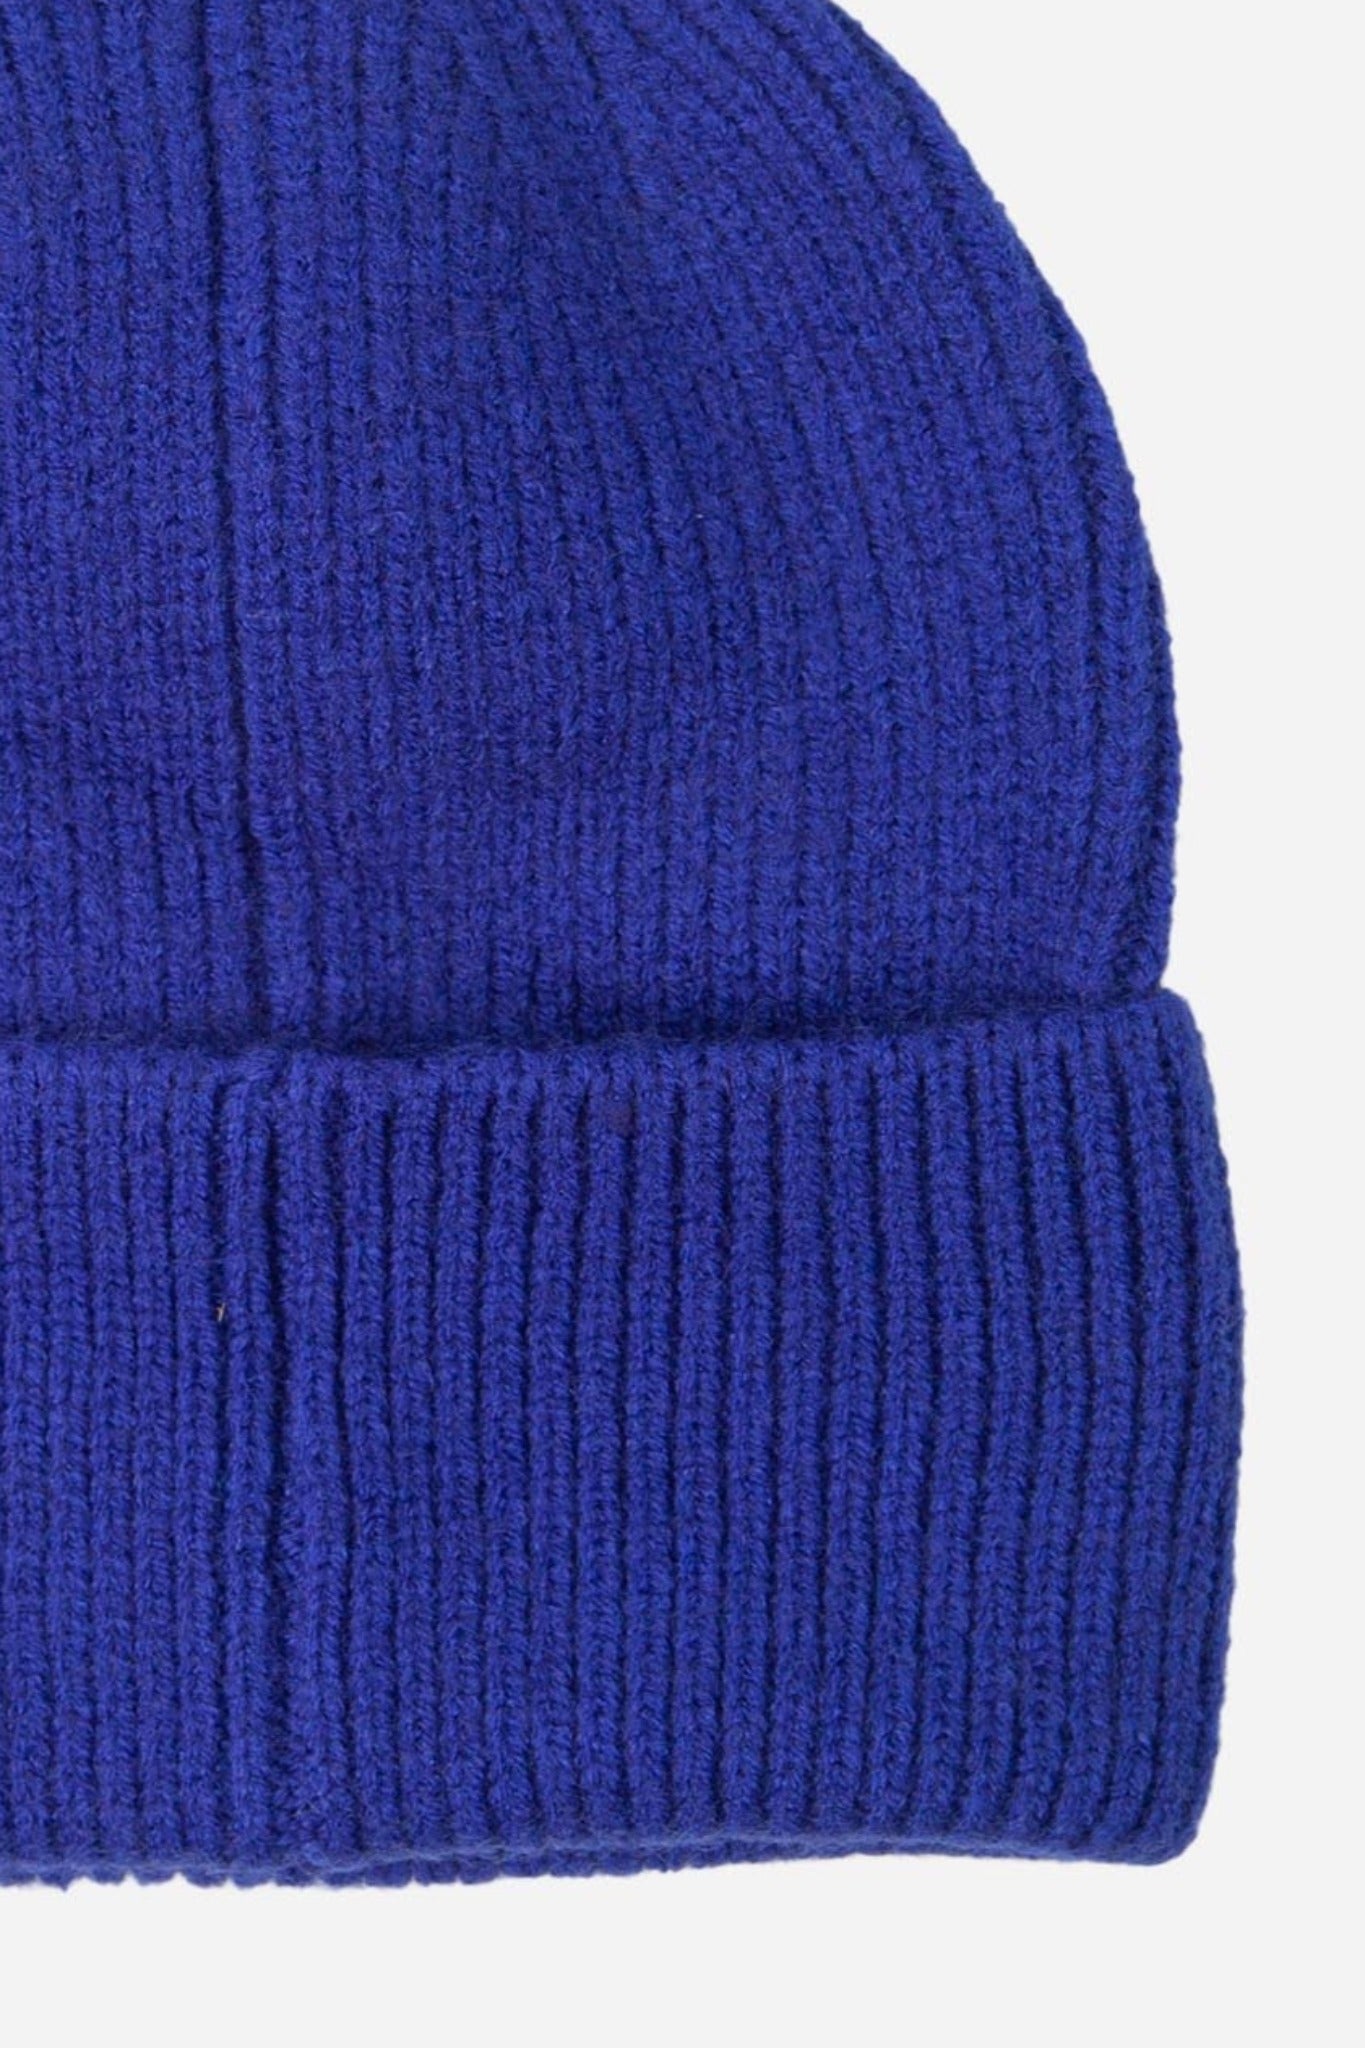 close up of the ribbed knitted material